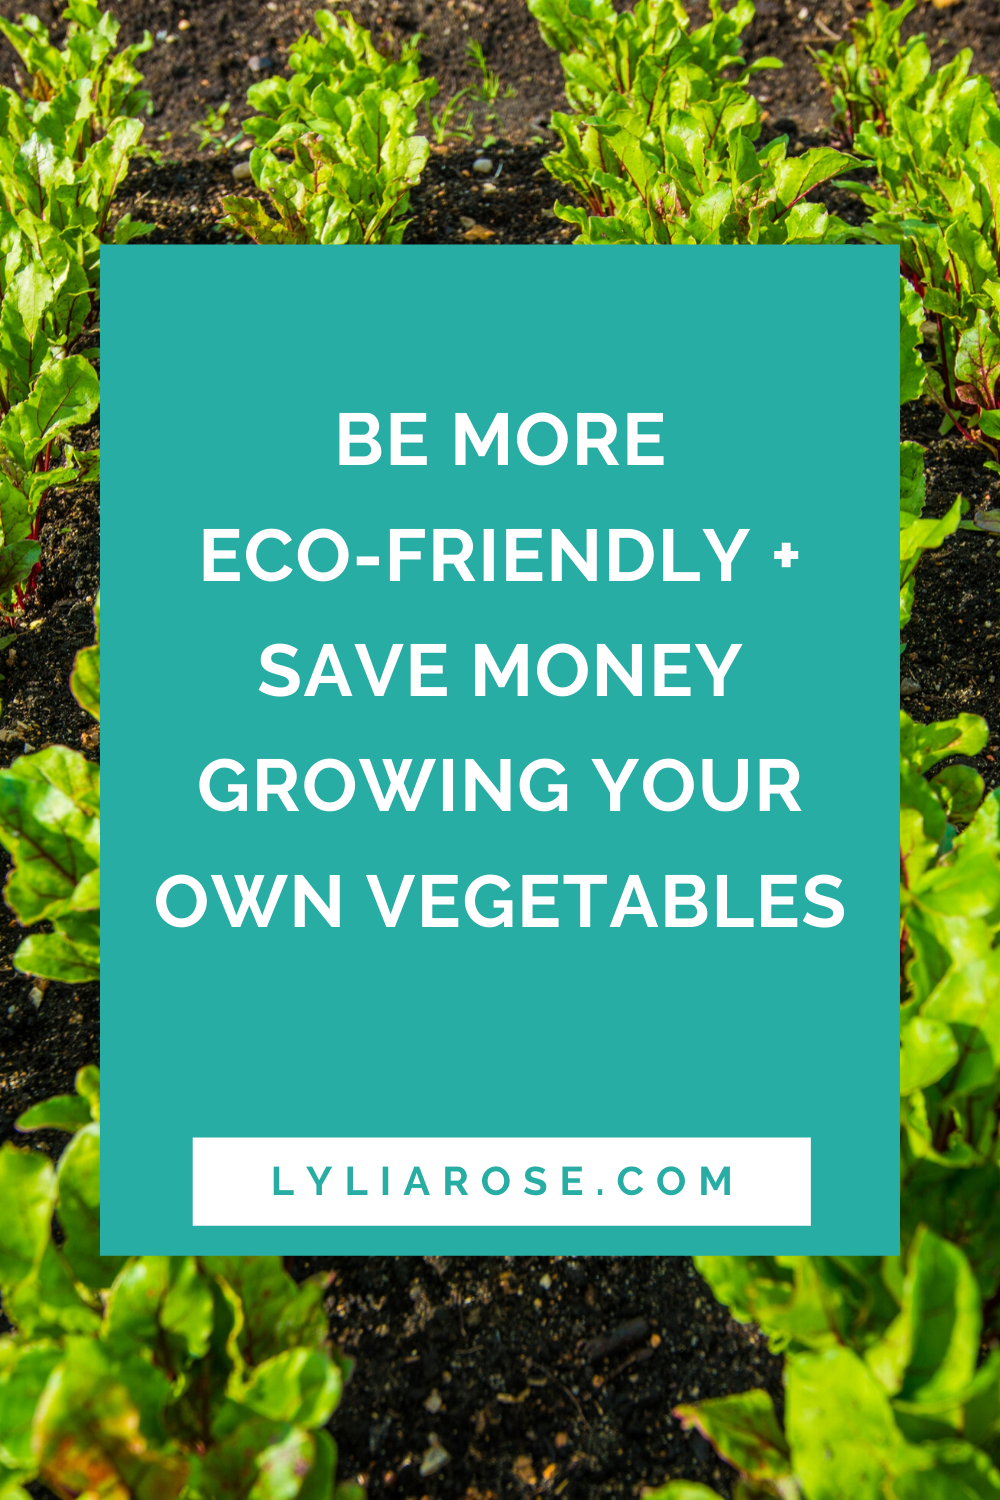 Be more eco-friendly + save money by growing your own vegetables